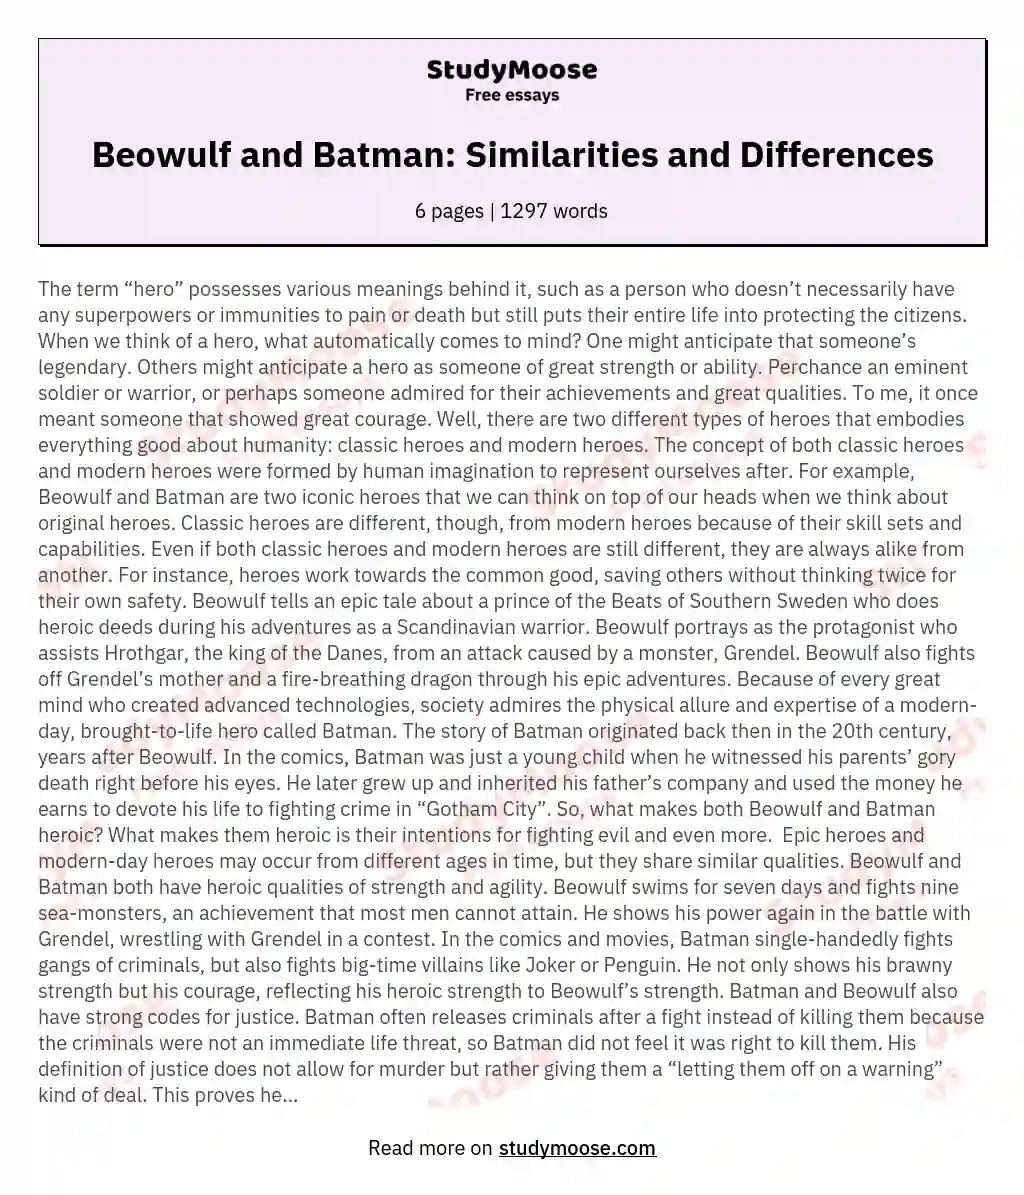 Beowulf and Batman: Similarities and Differences essay